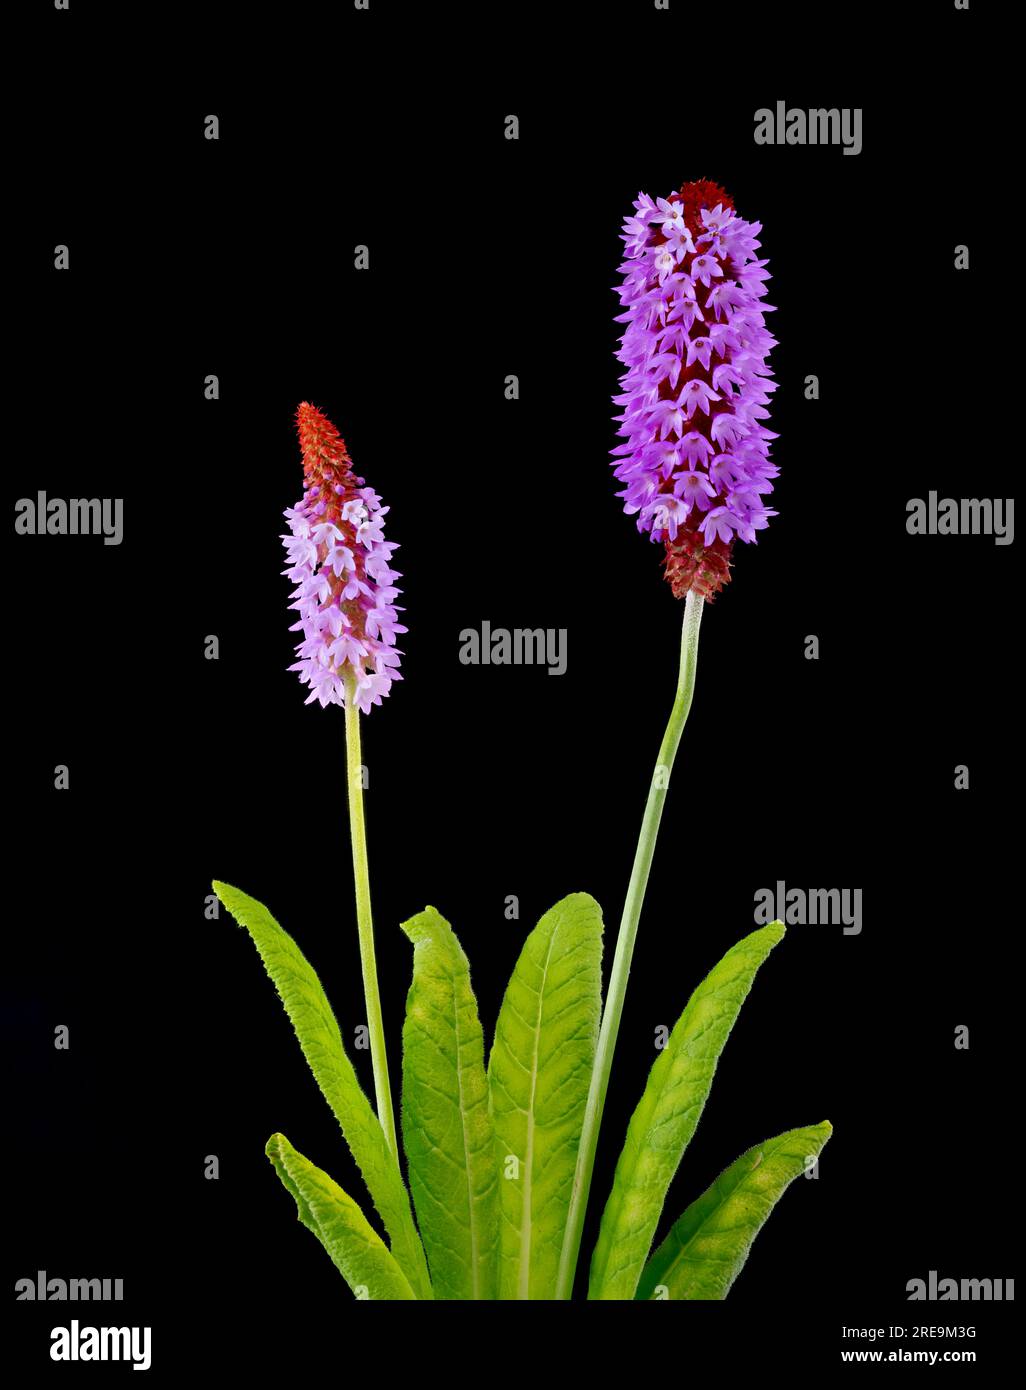 A flowering spike of Primula vialii, which is a Chinese alpine plant that has become popular in the UK, photographed against a plain black background Stock Photo